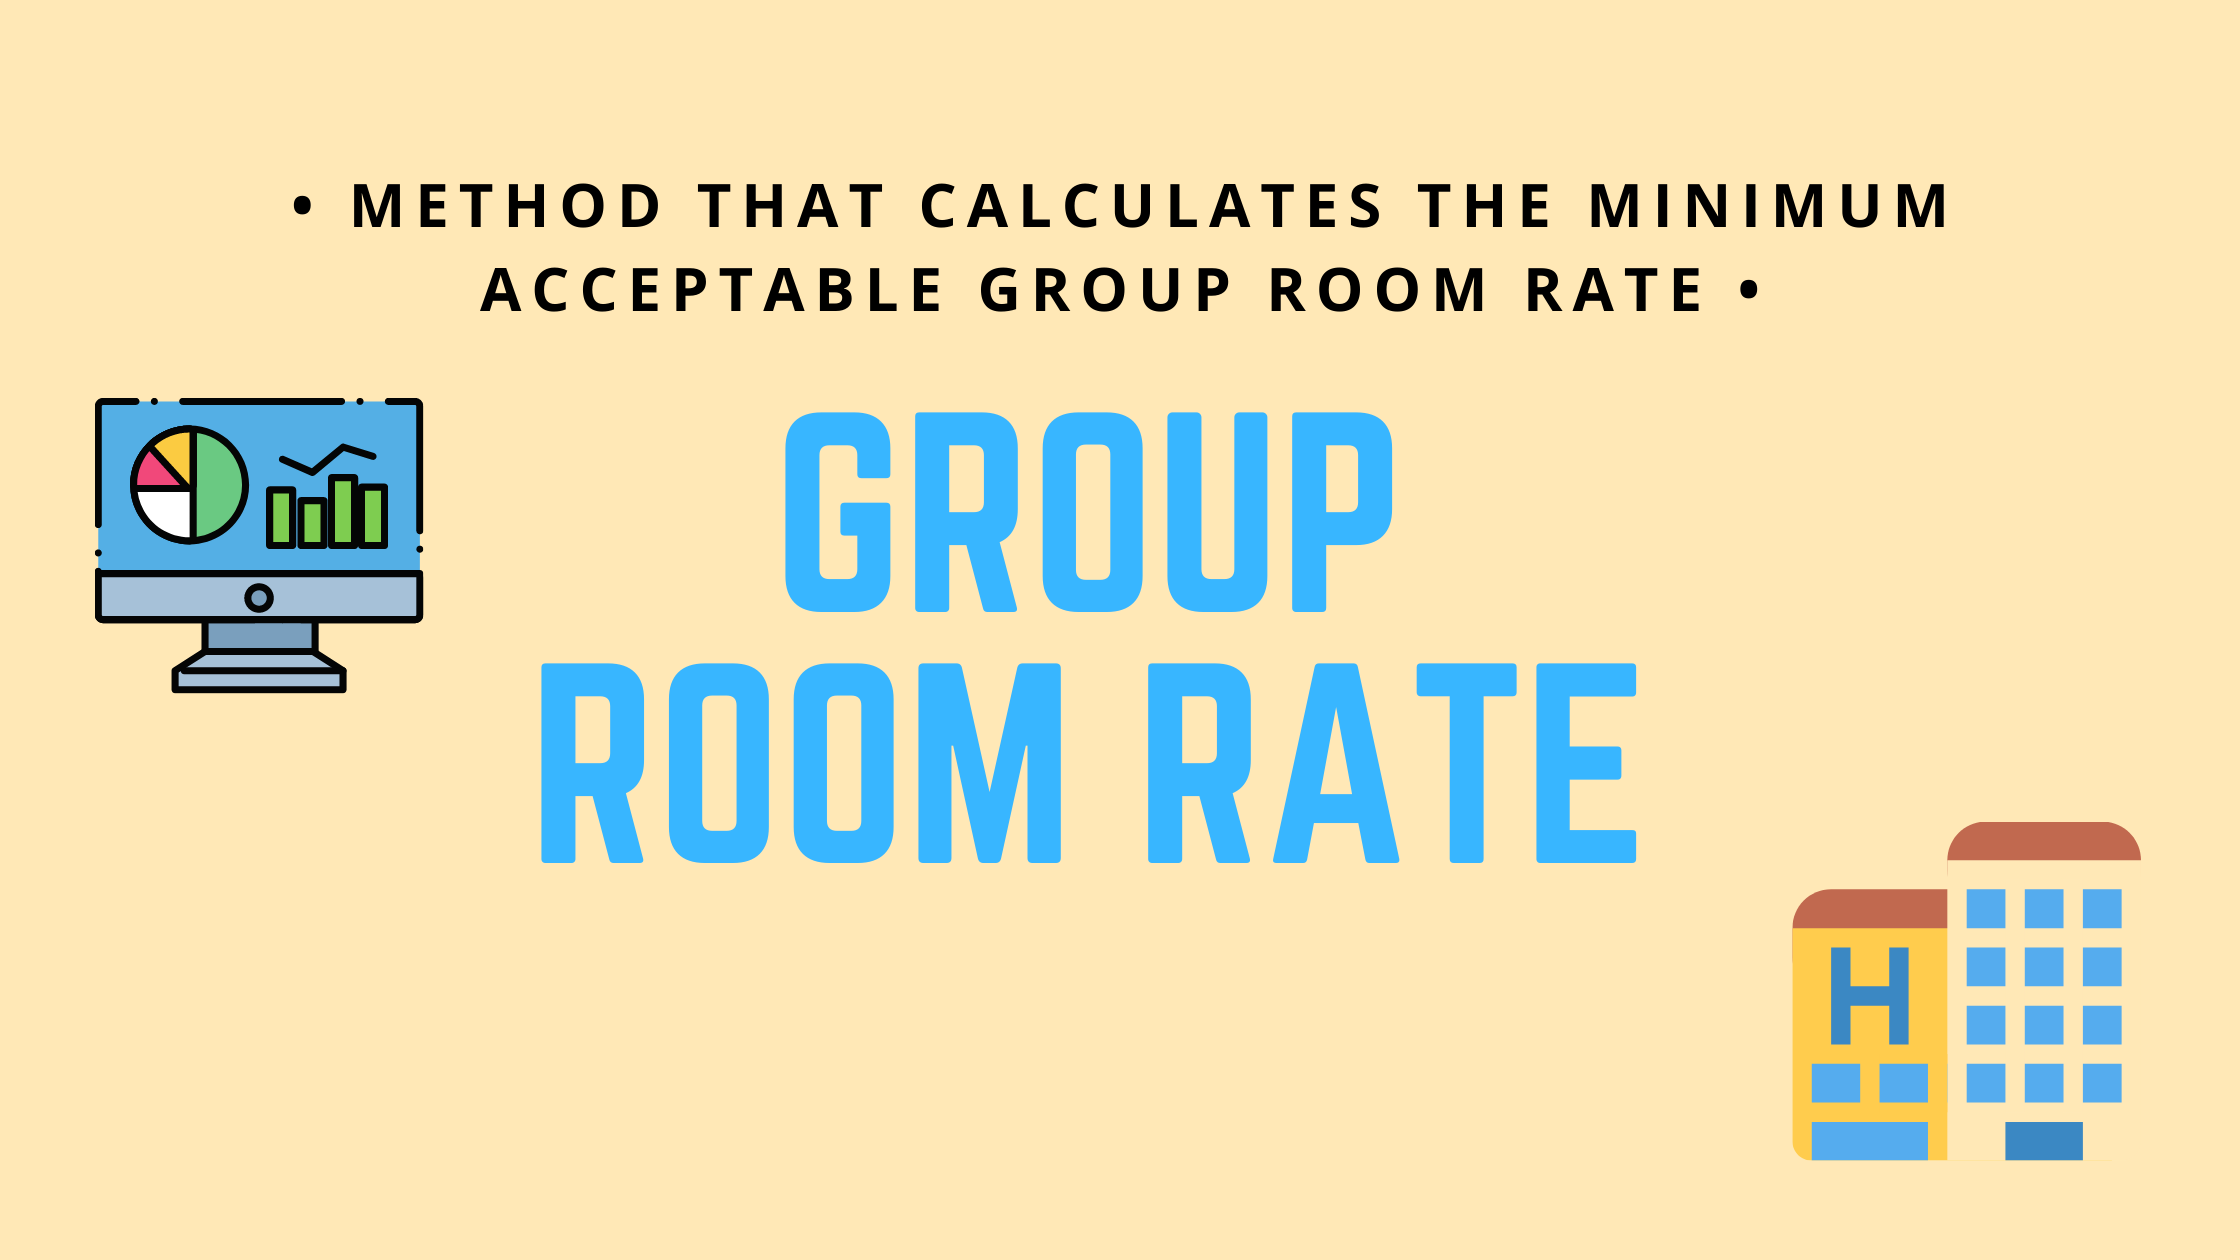 How to calculate the group room rate?